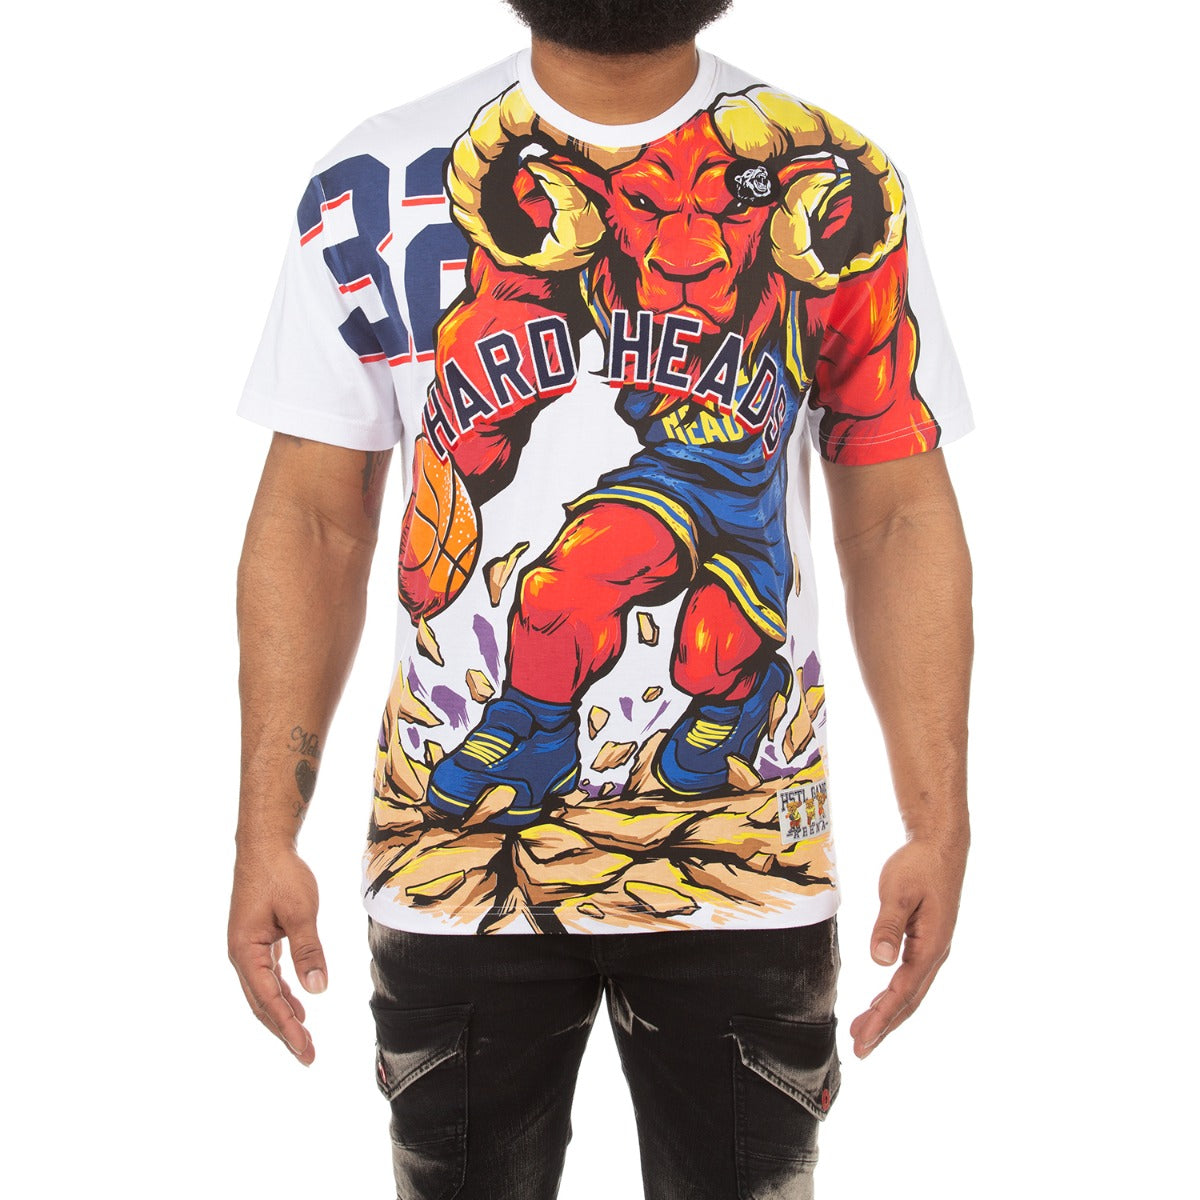 Men's White Graphic Tee with Red and Yellow Bull and ‘32’ Print - Groundbreak Knit Shirt